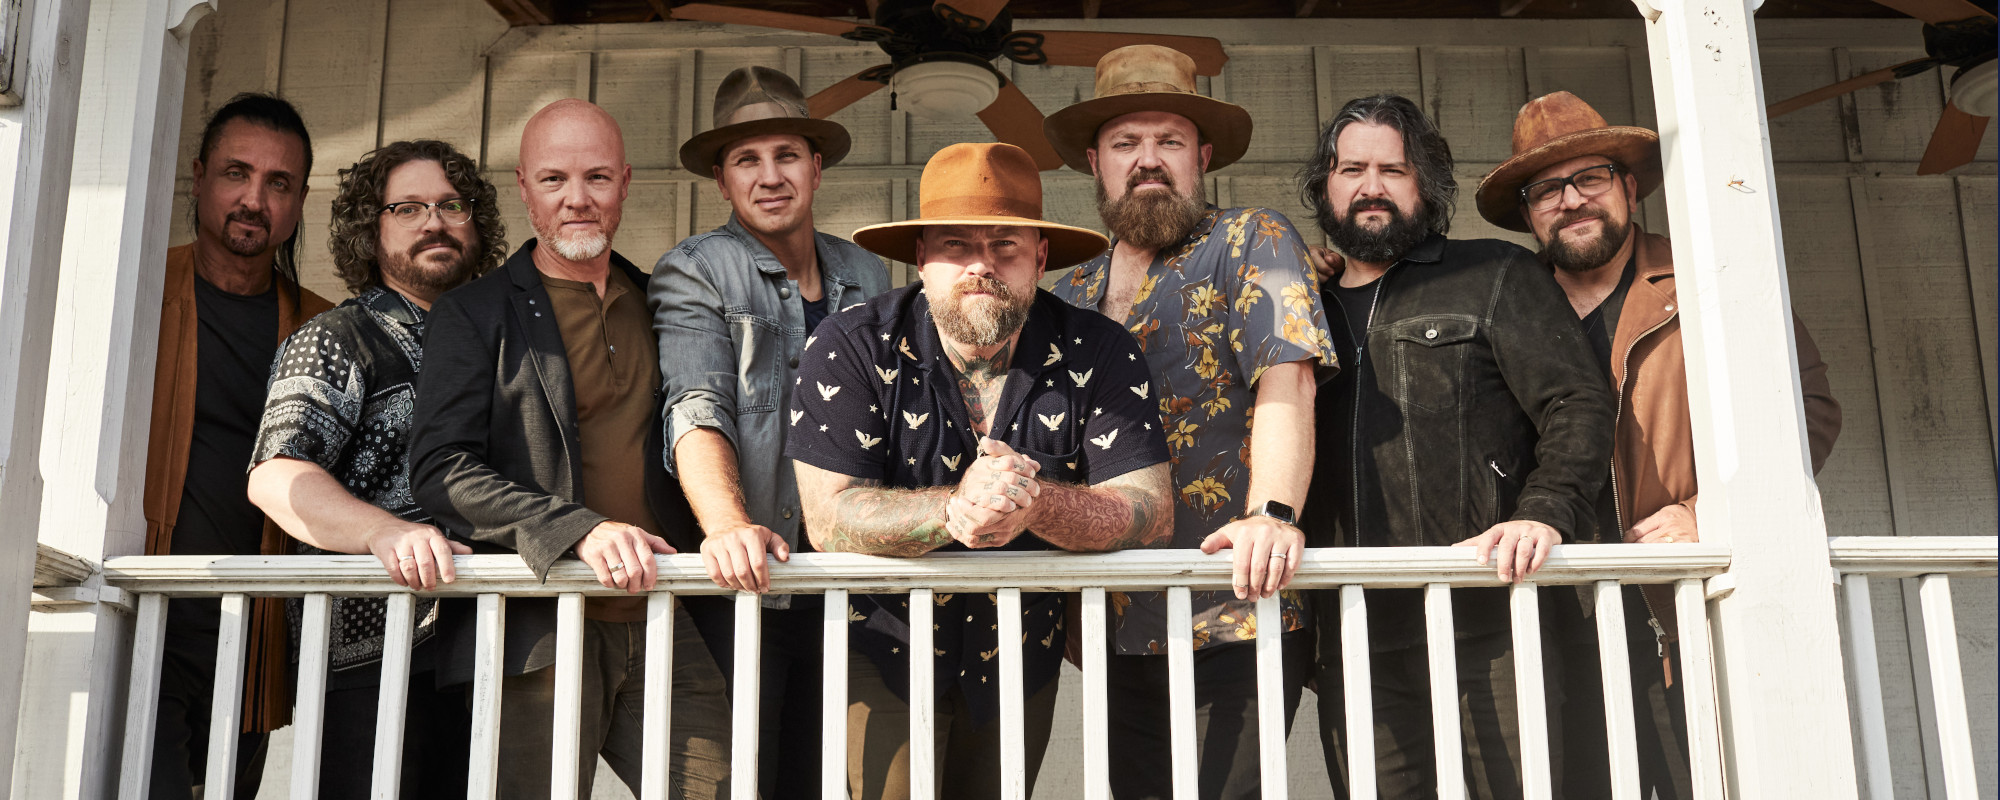 Members of Zac Brown Band Denied Entry into Canada, Vancouver Show Nixed